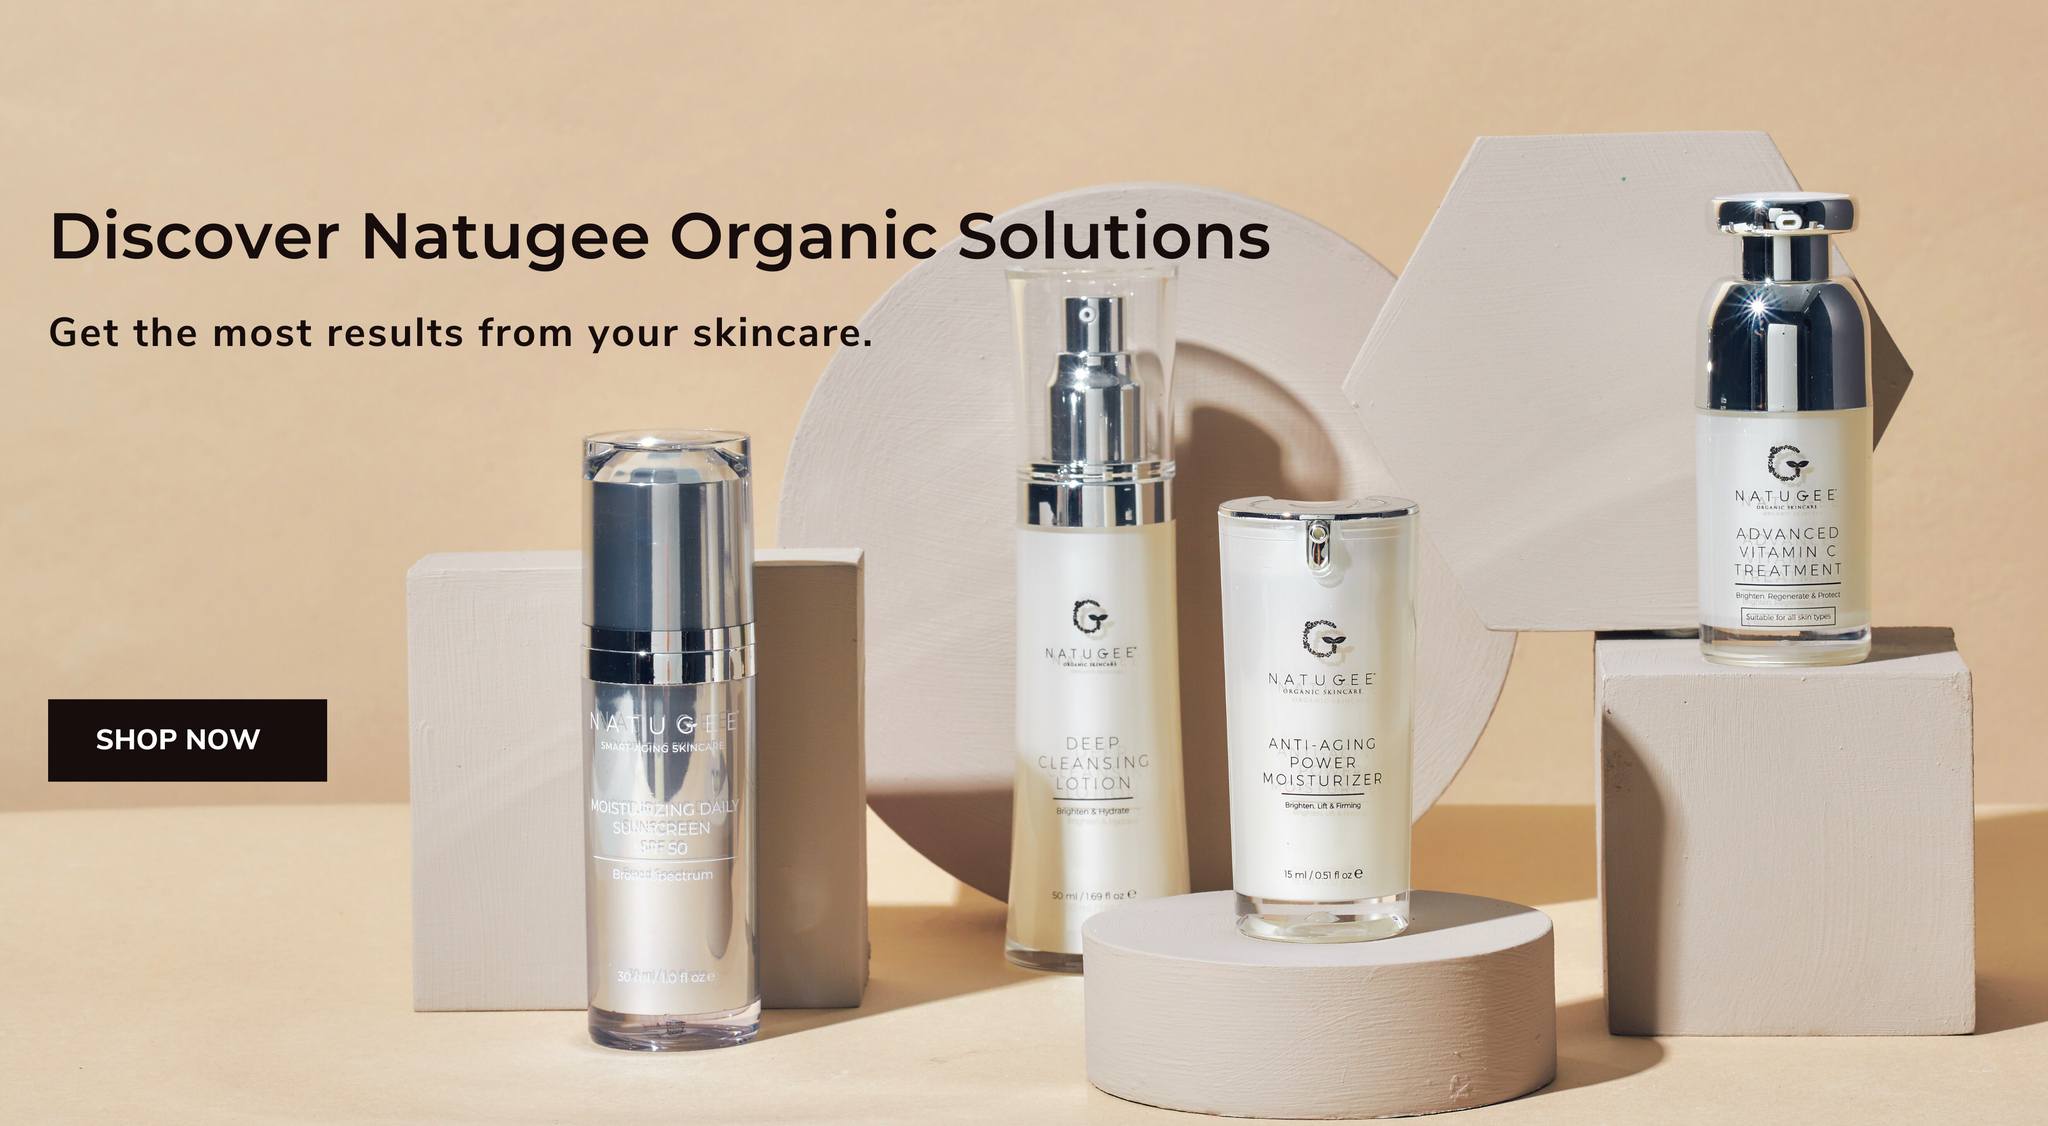 Natugee Organic Solutions Skincare